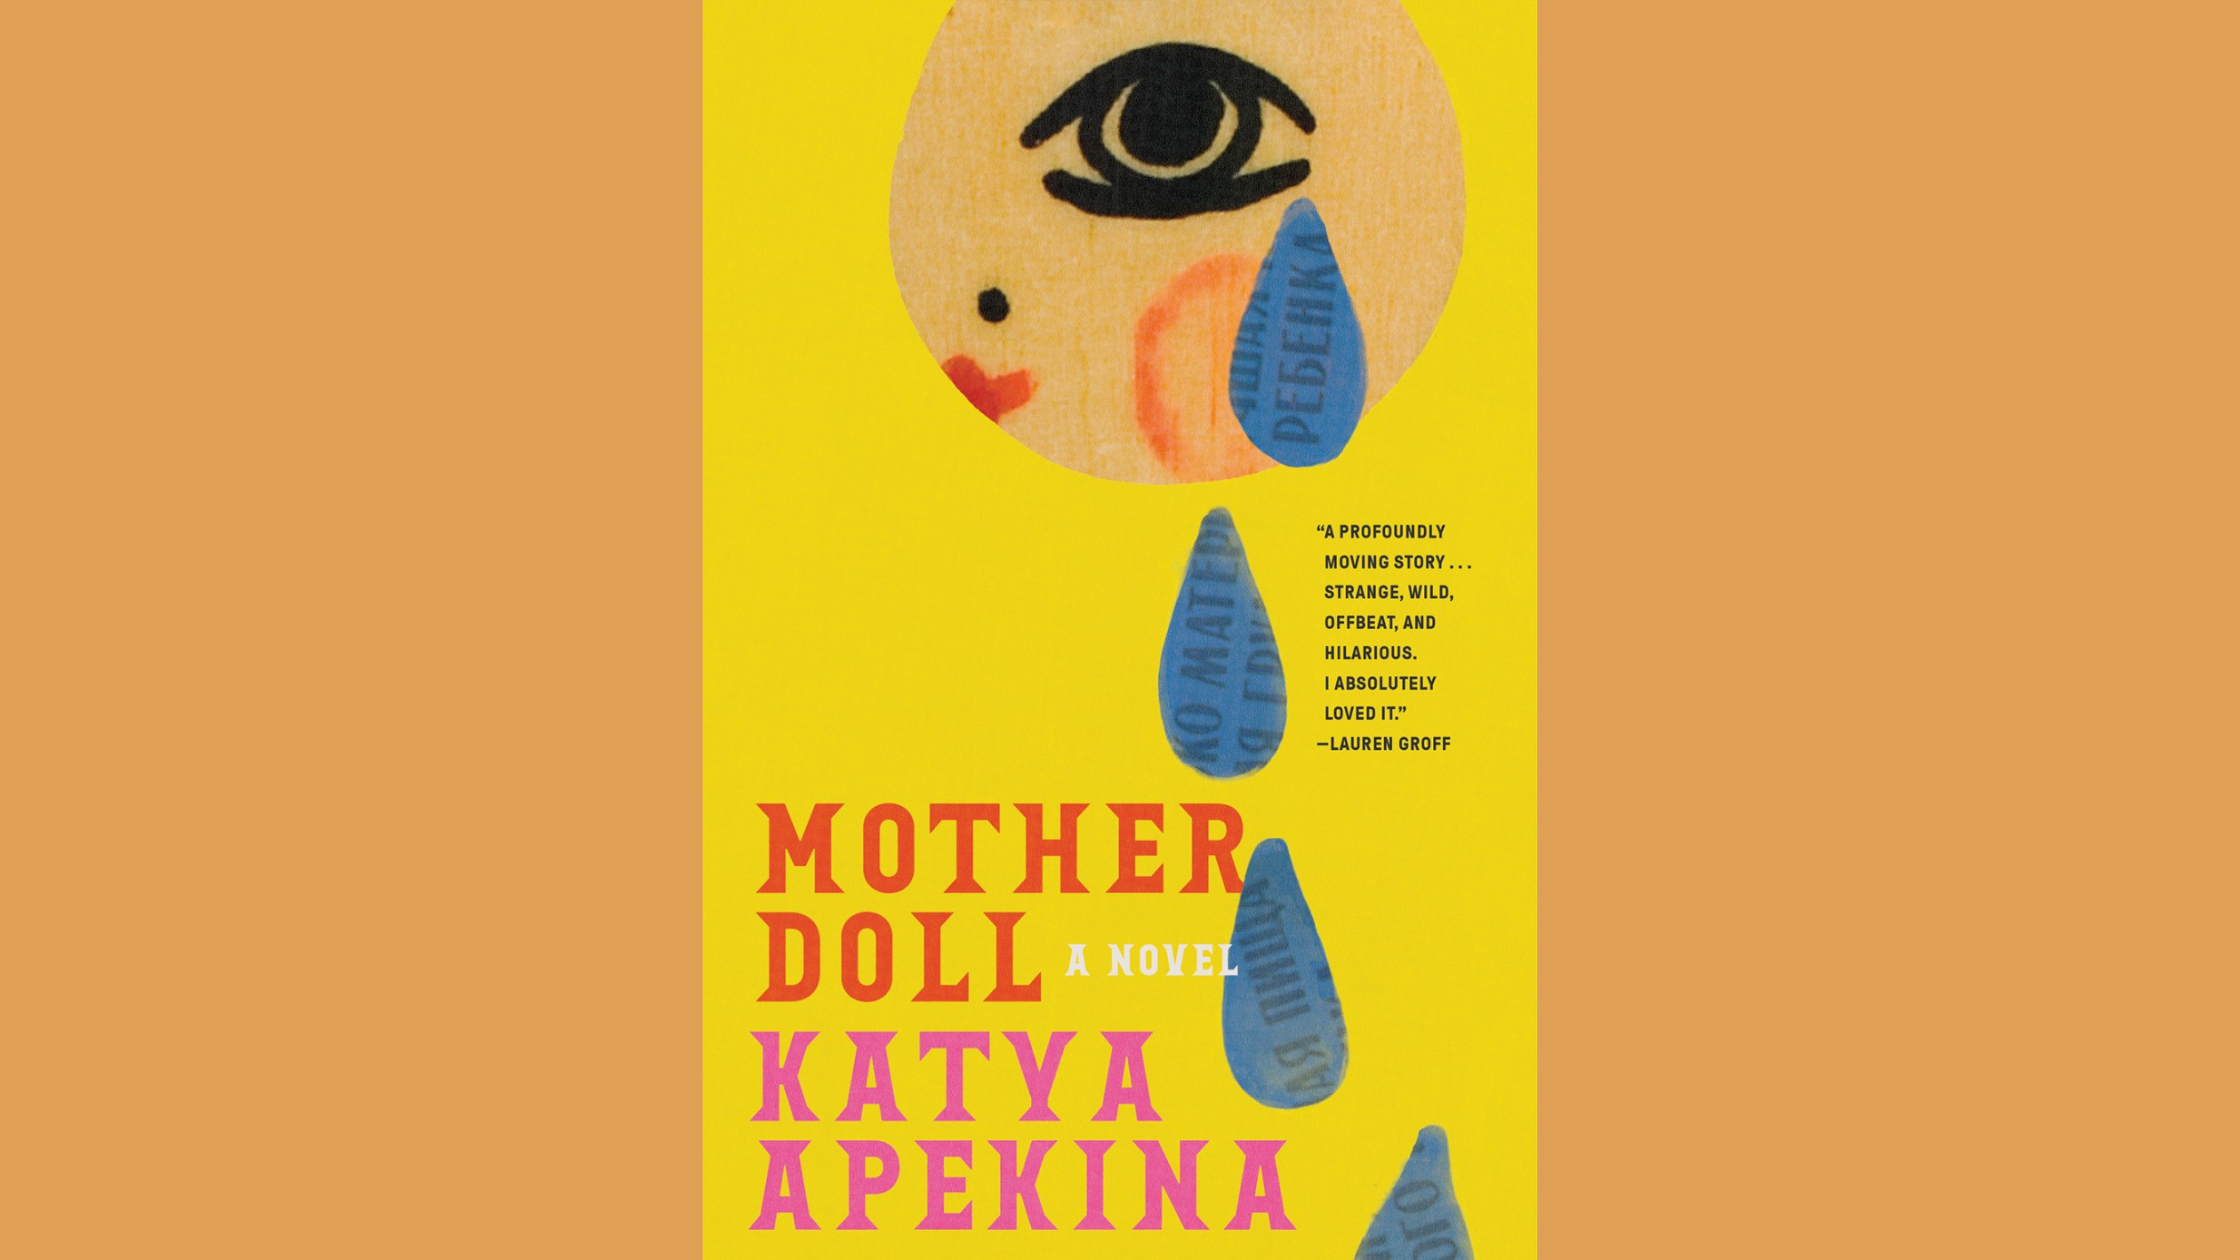 Book Cover of Mother Doll By Katya Apekina